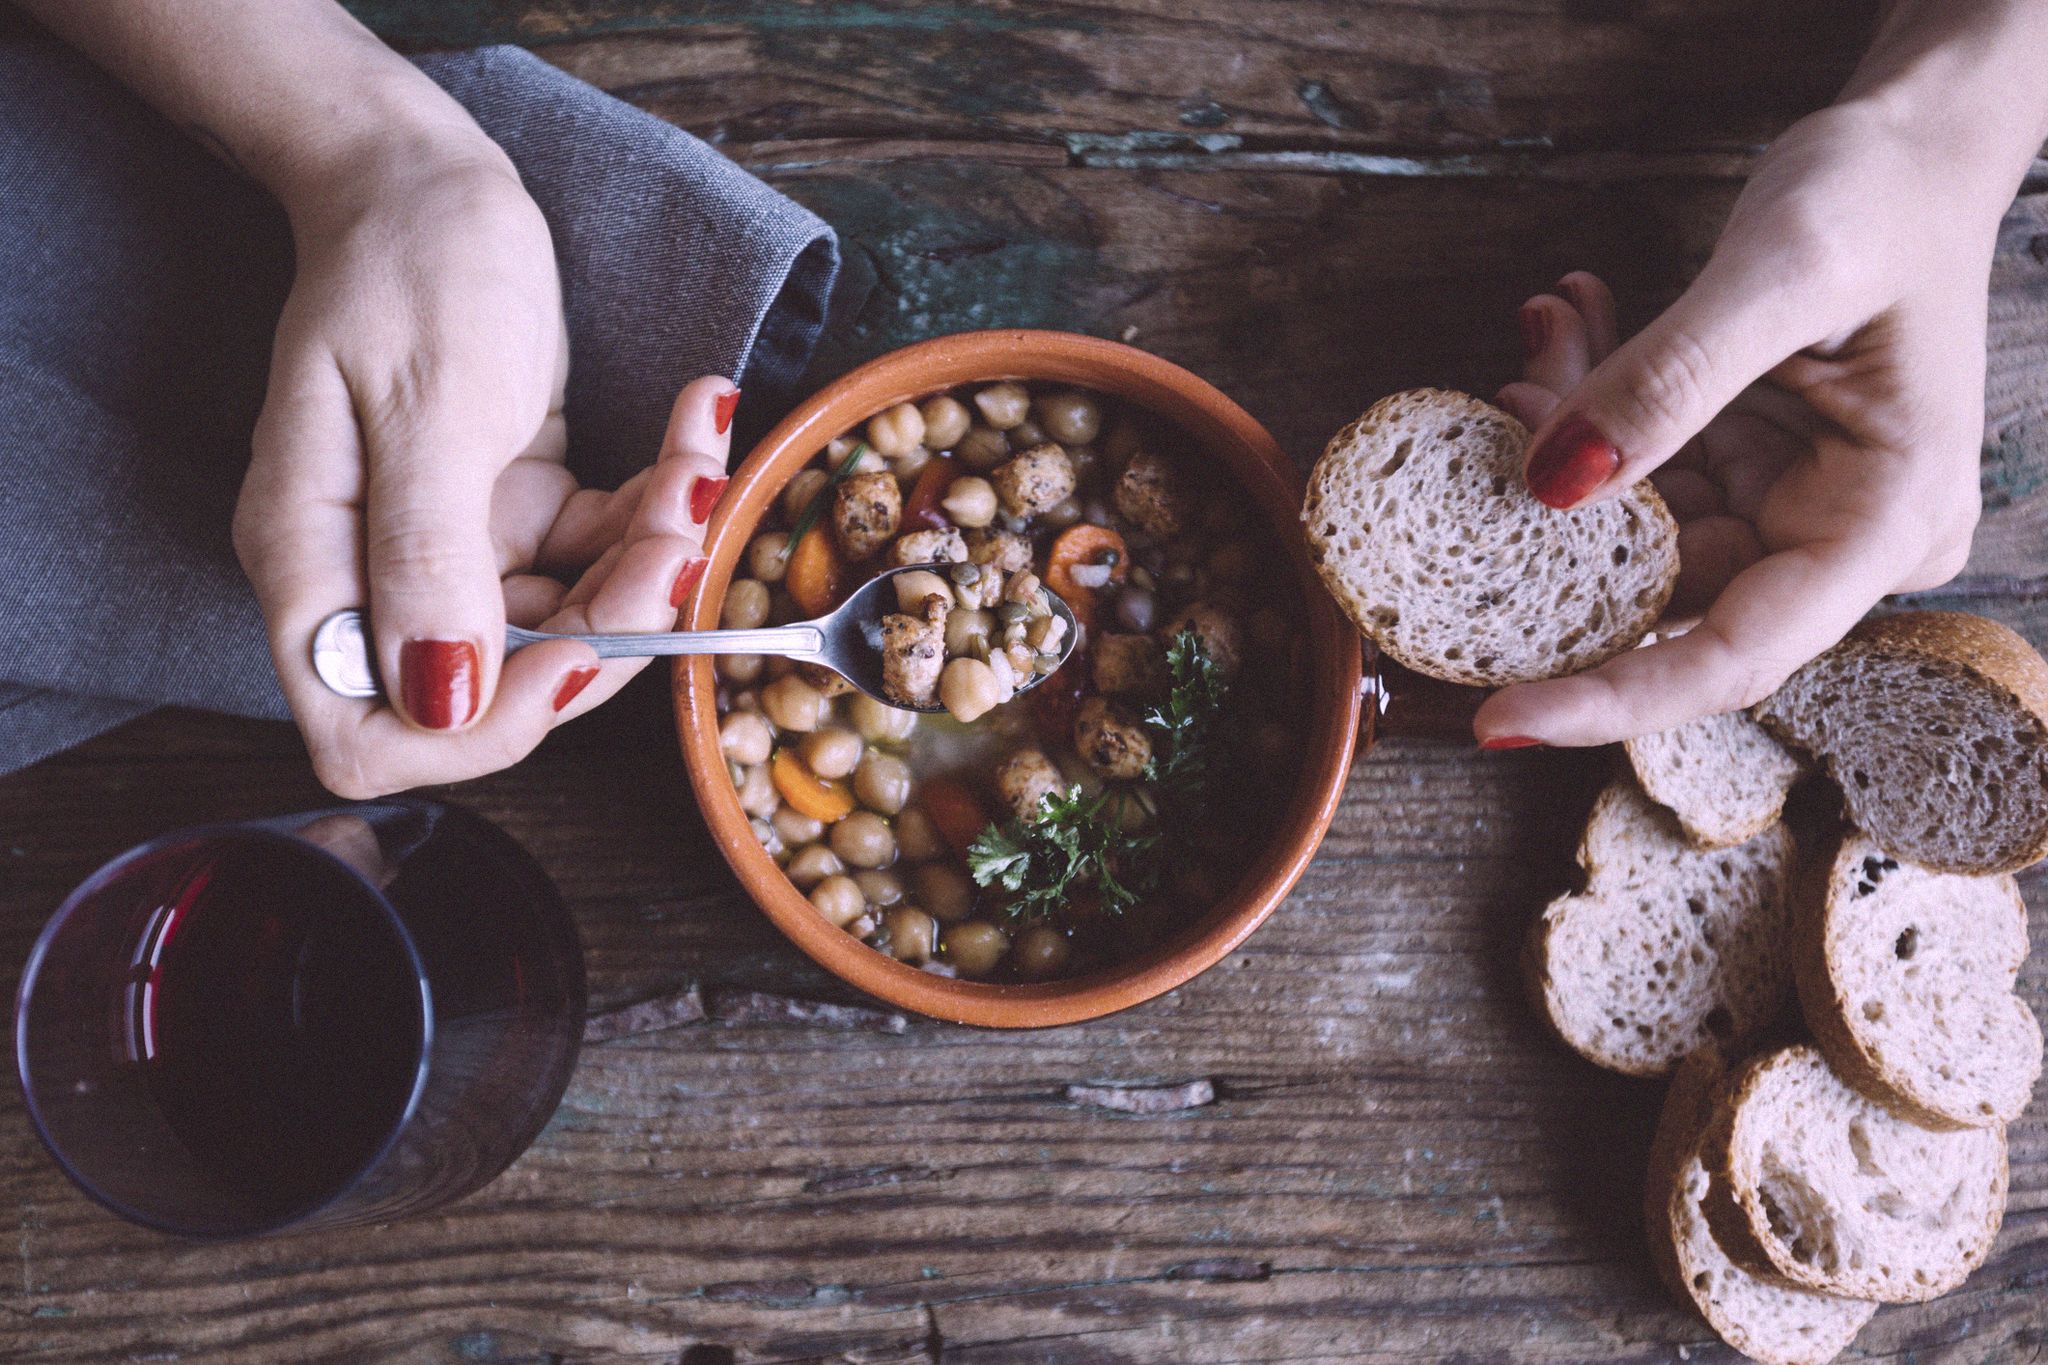 Woman eating Mediterranean soup with bread, close-up